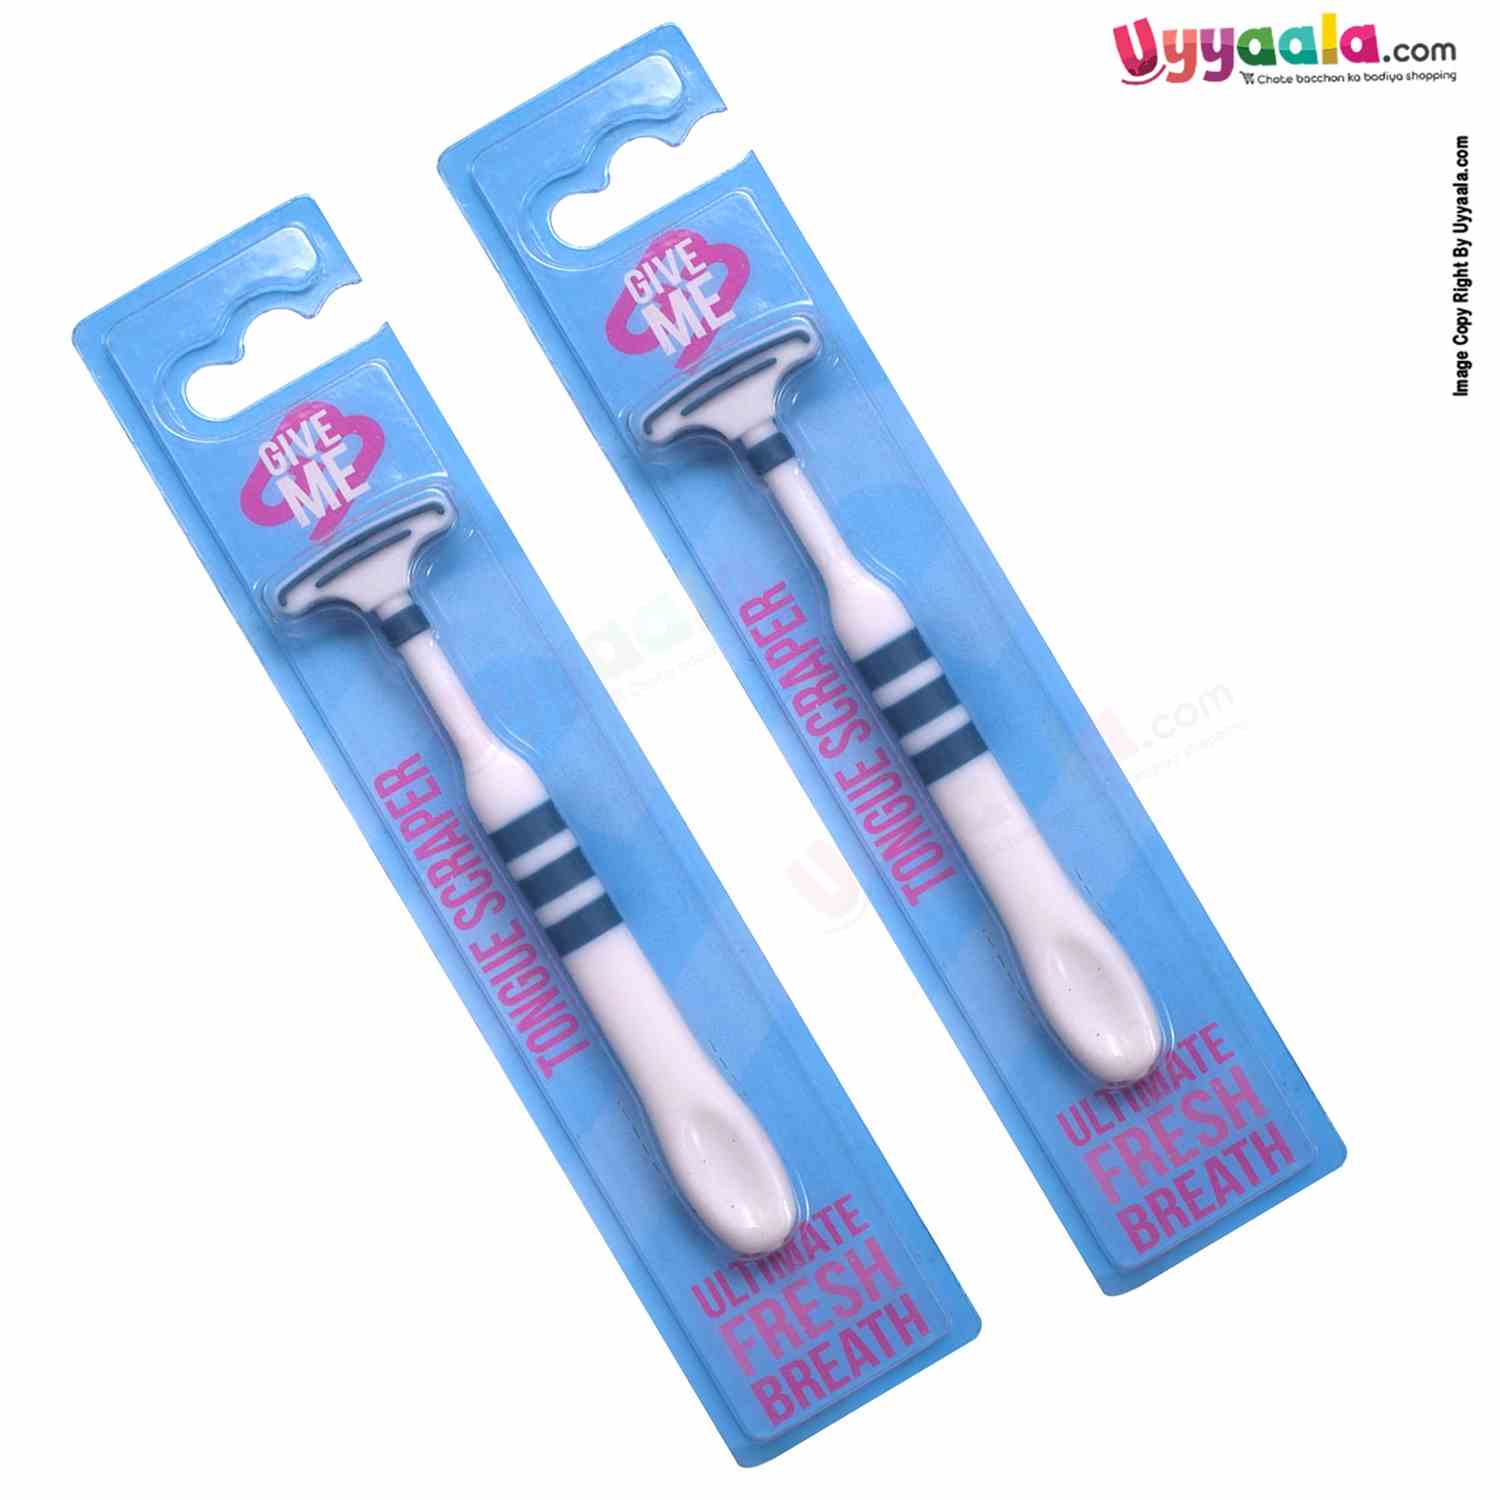 GIVE ME baby Tongue Scraper for Fresh Breath Pack of 2, 10+m age - White, Green